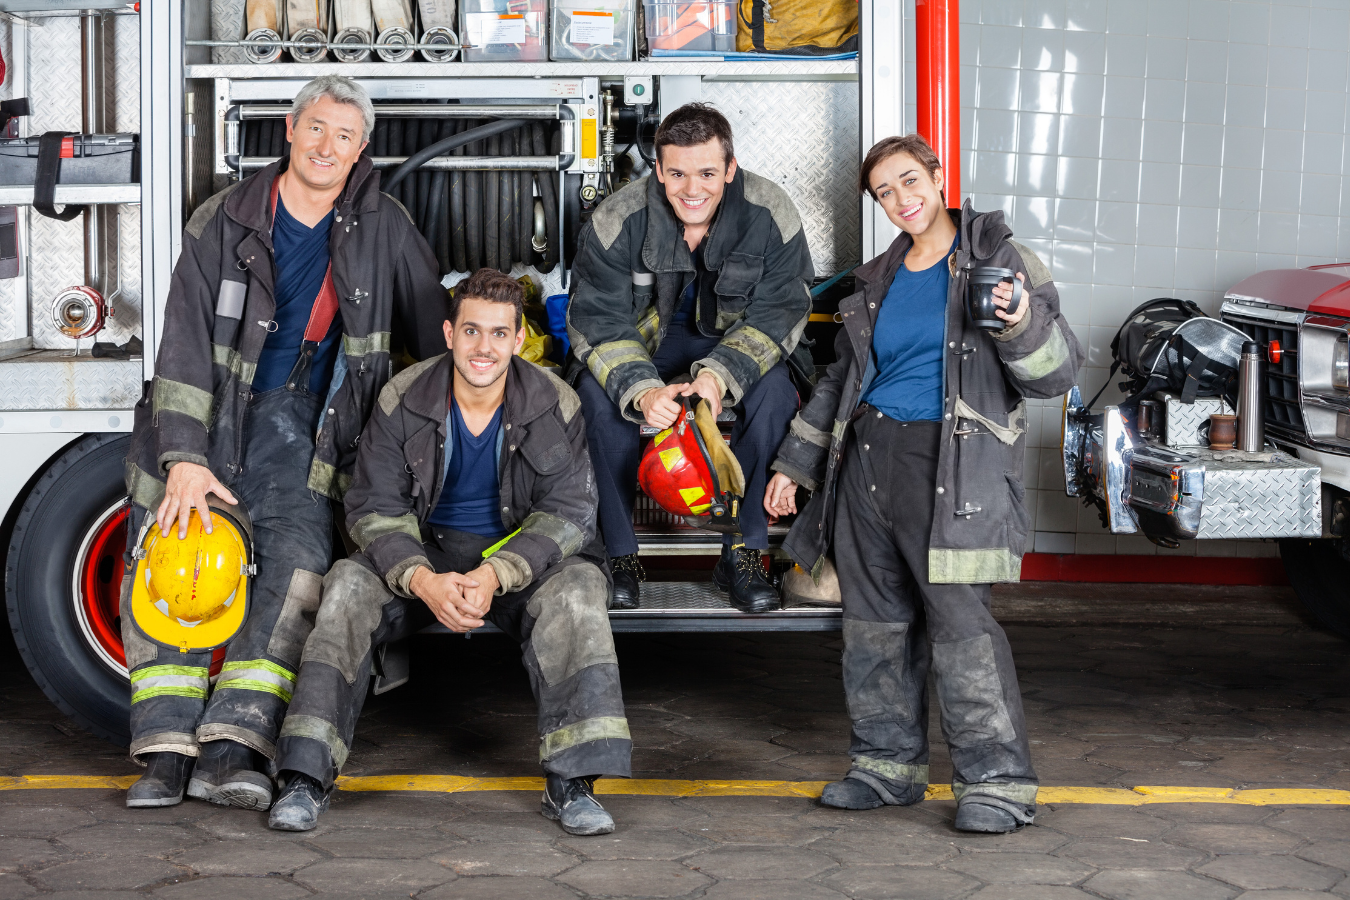 Firefighters smiling, sitting on their firetruck. Public safety organizations can be optimize their organizations through the use of public safety ERP software like Sparkrock 365.